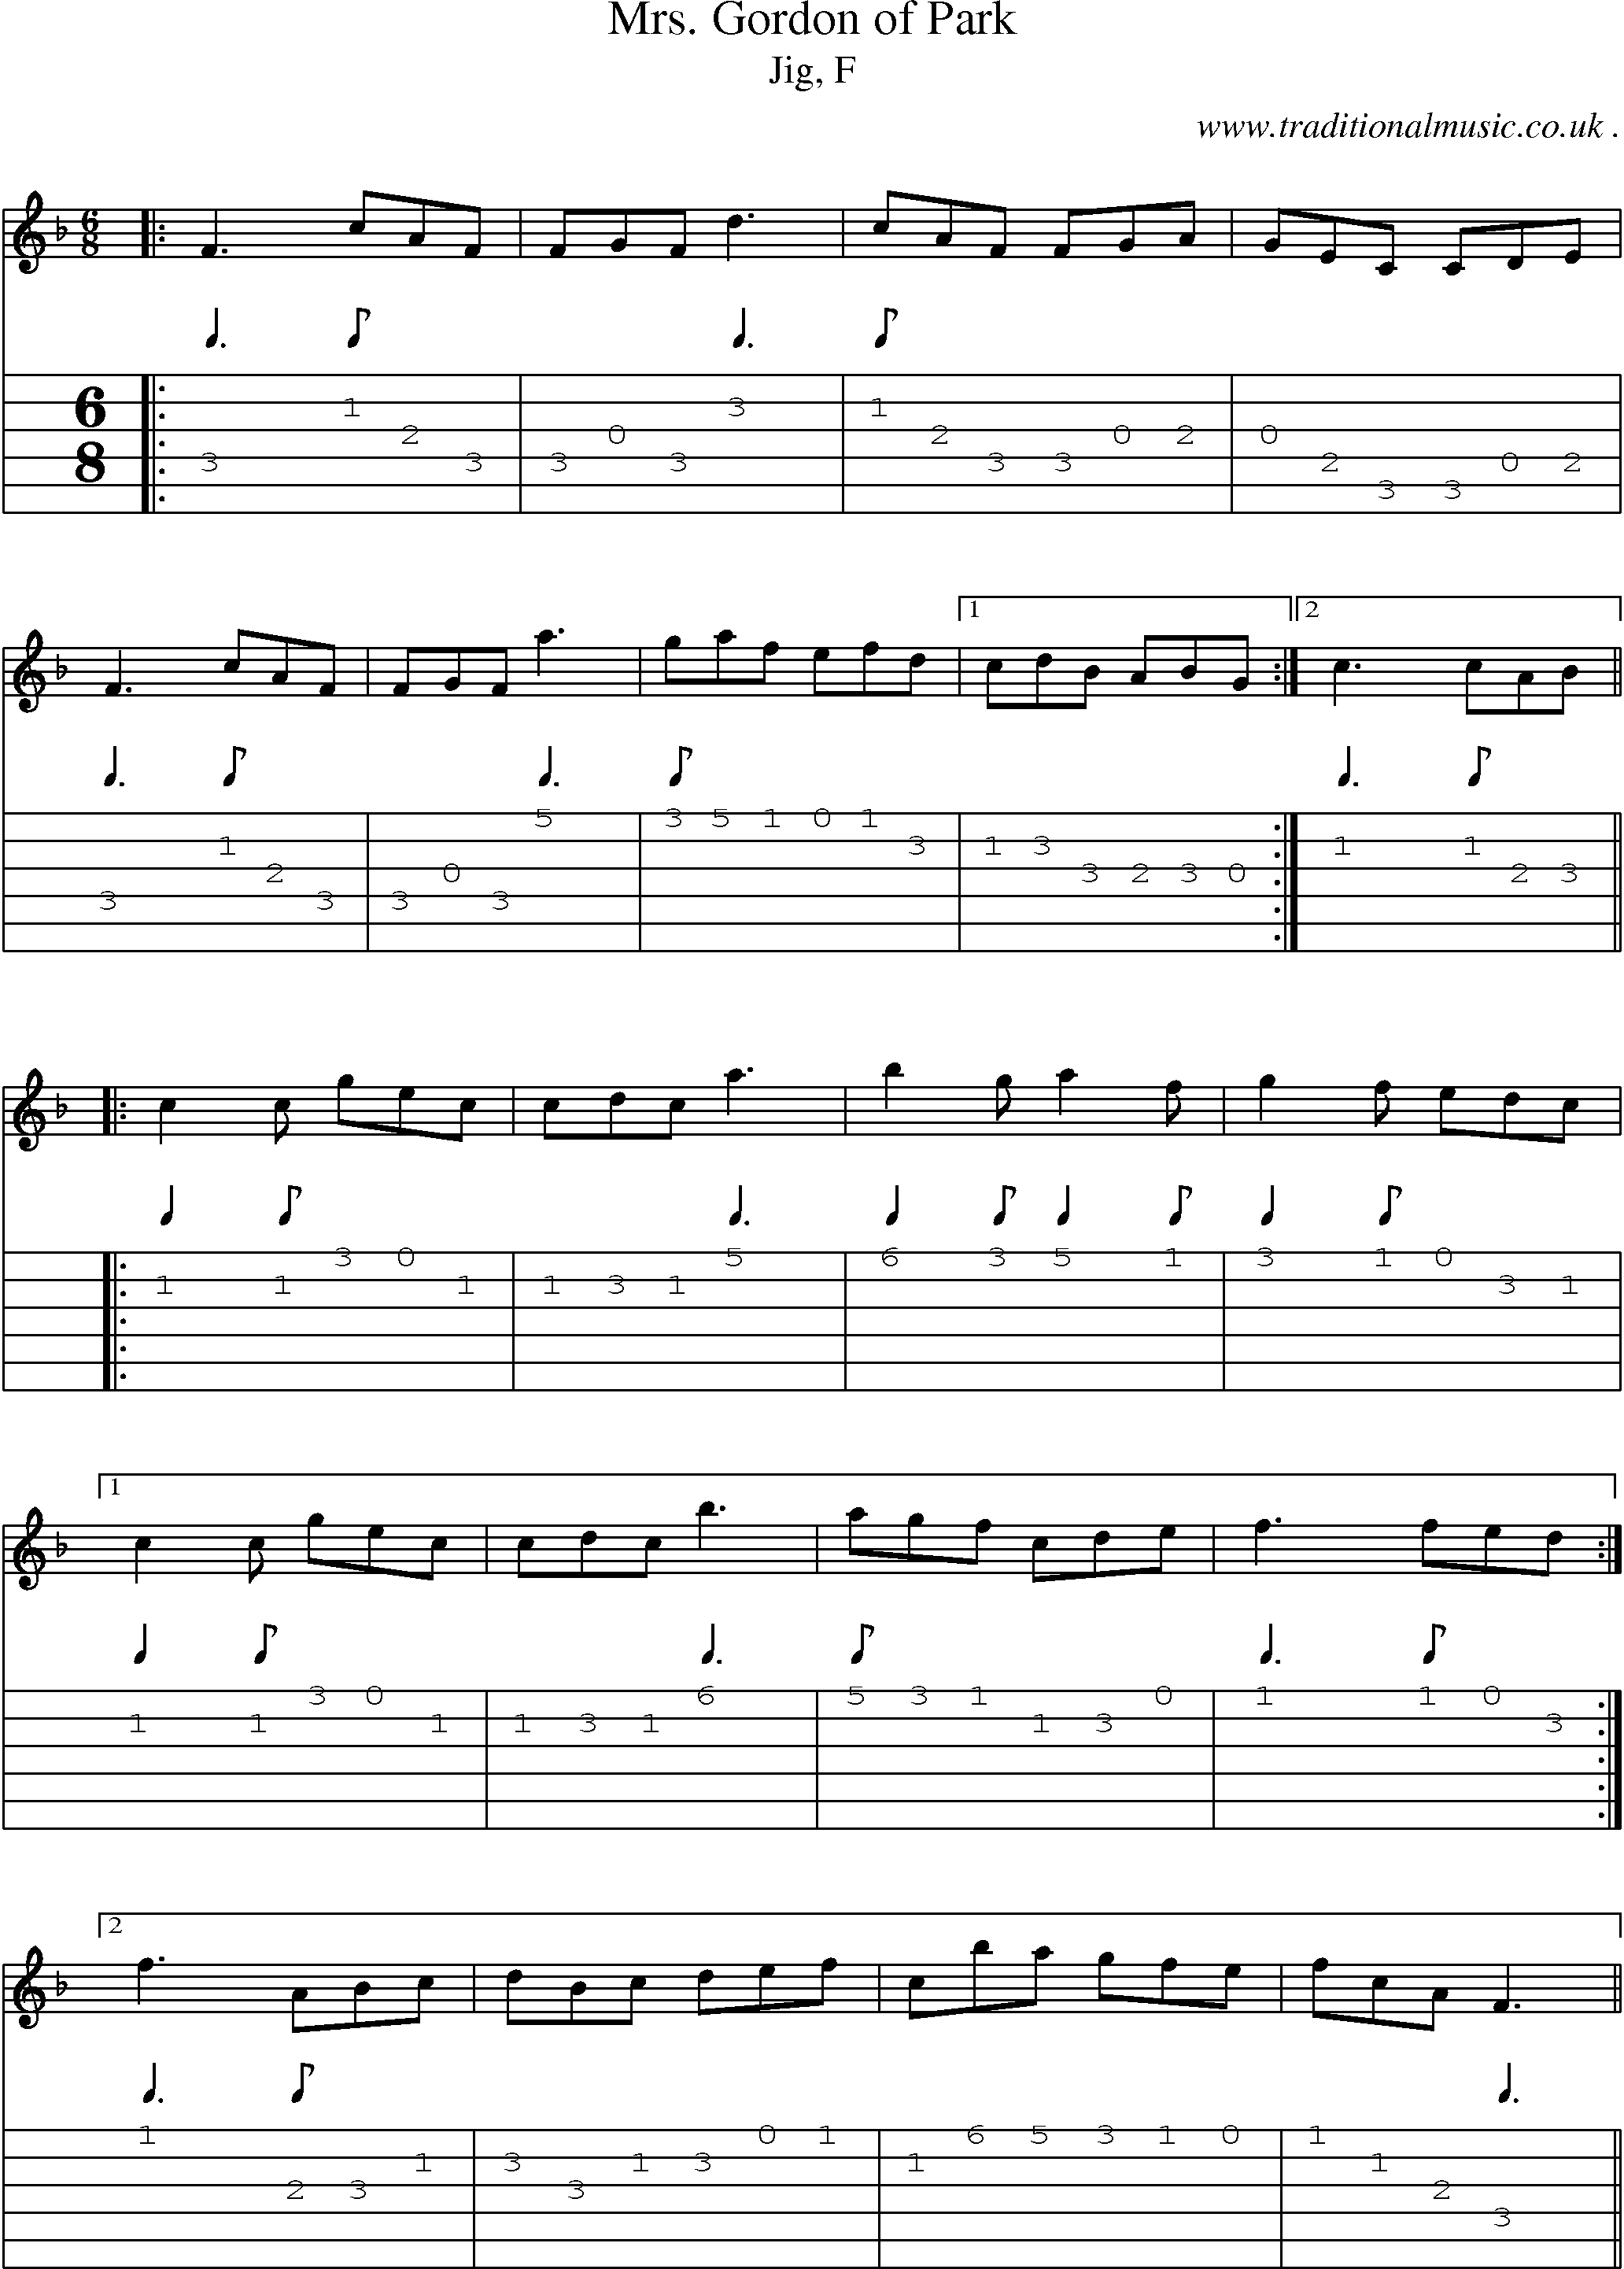 Sheet-music  score, Chords and Guitar Tabs for Mrs Gordon Of Park